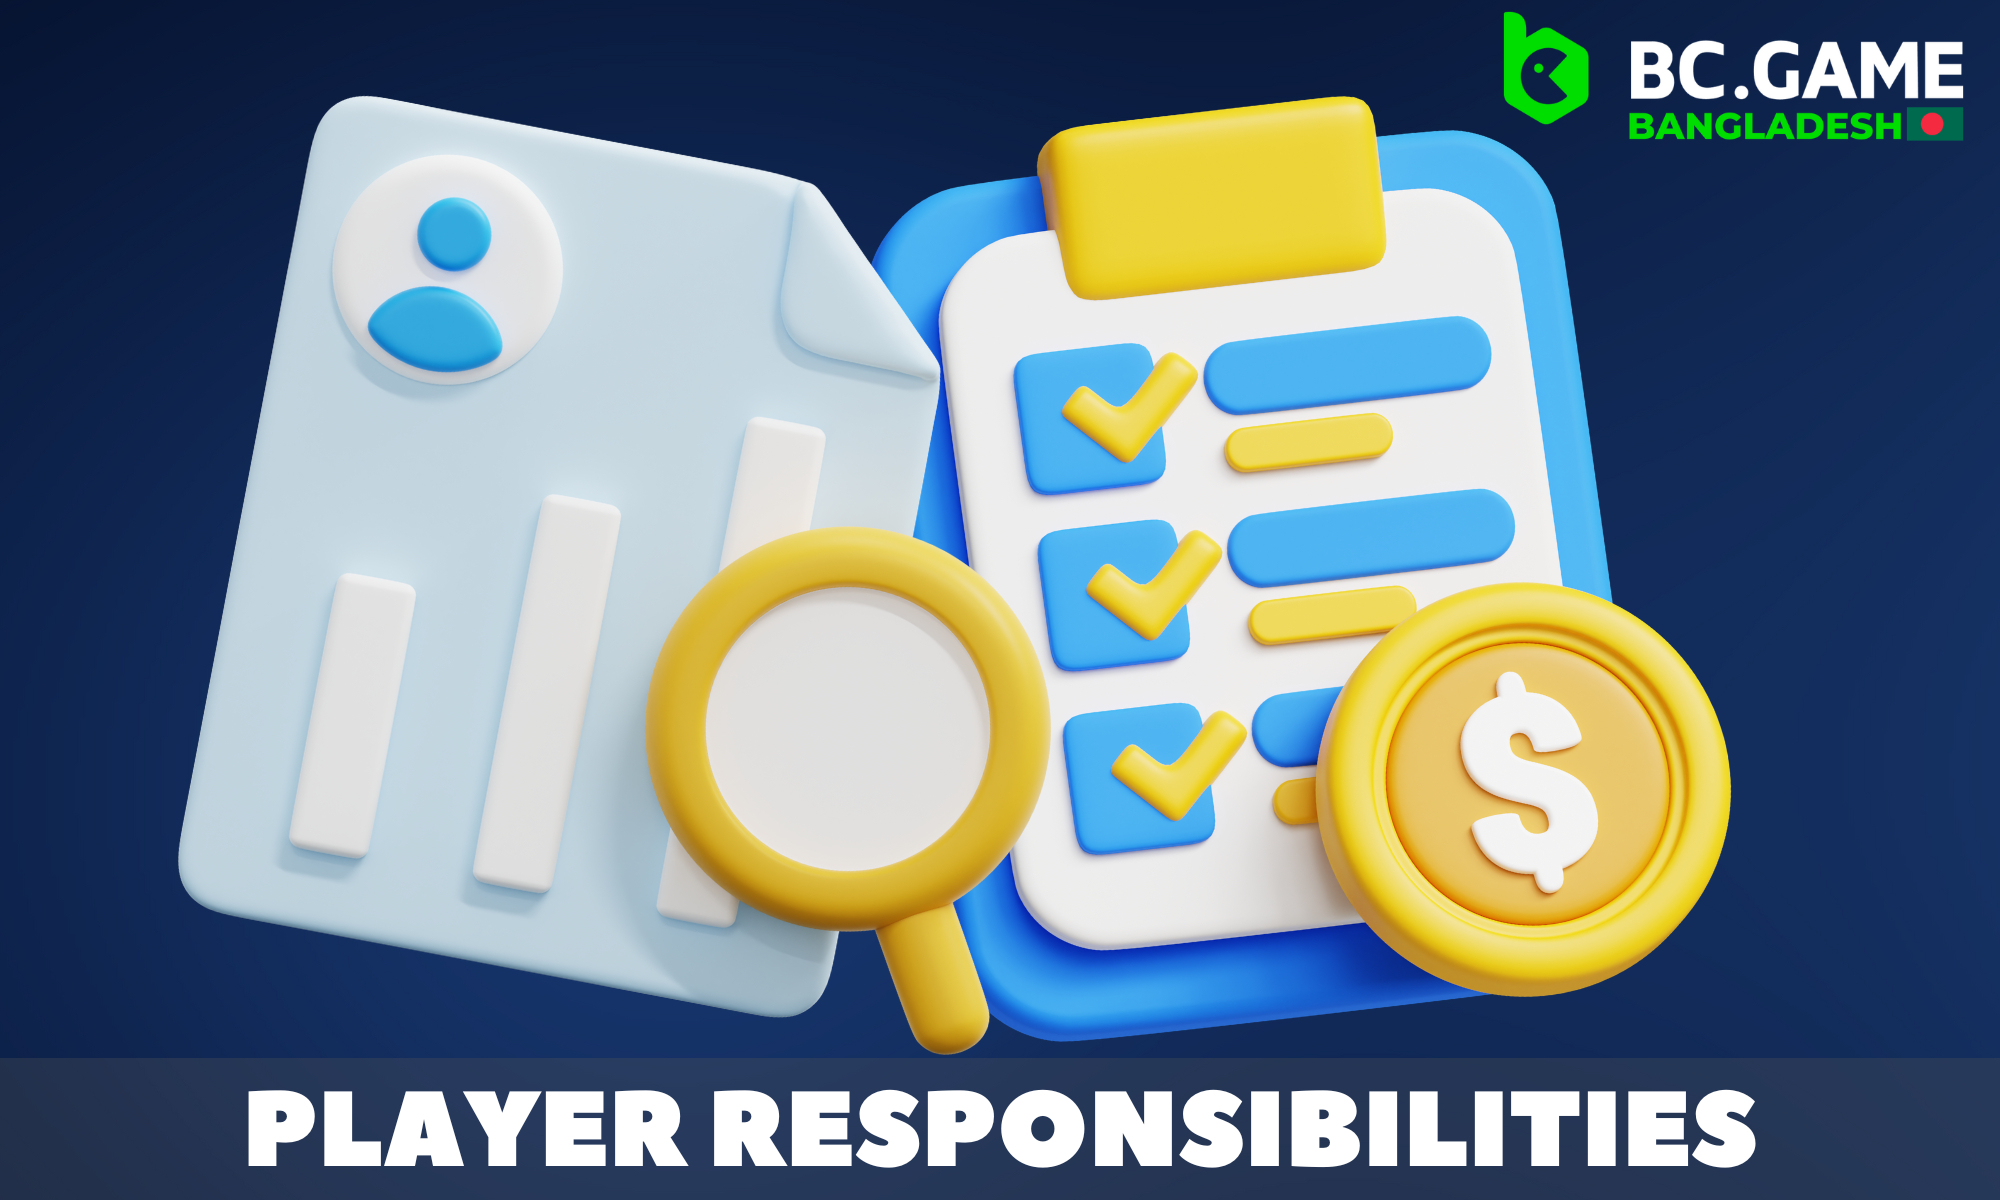 In BC Game, in order to be able to withdraw money, users must wager the entire deposit amount